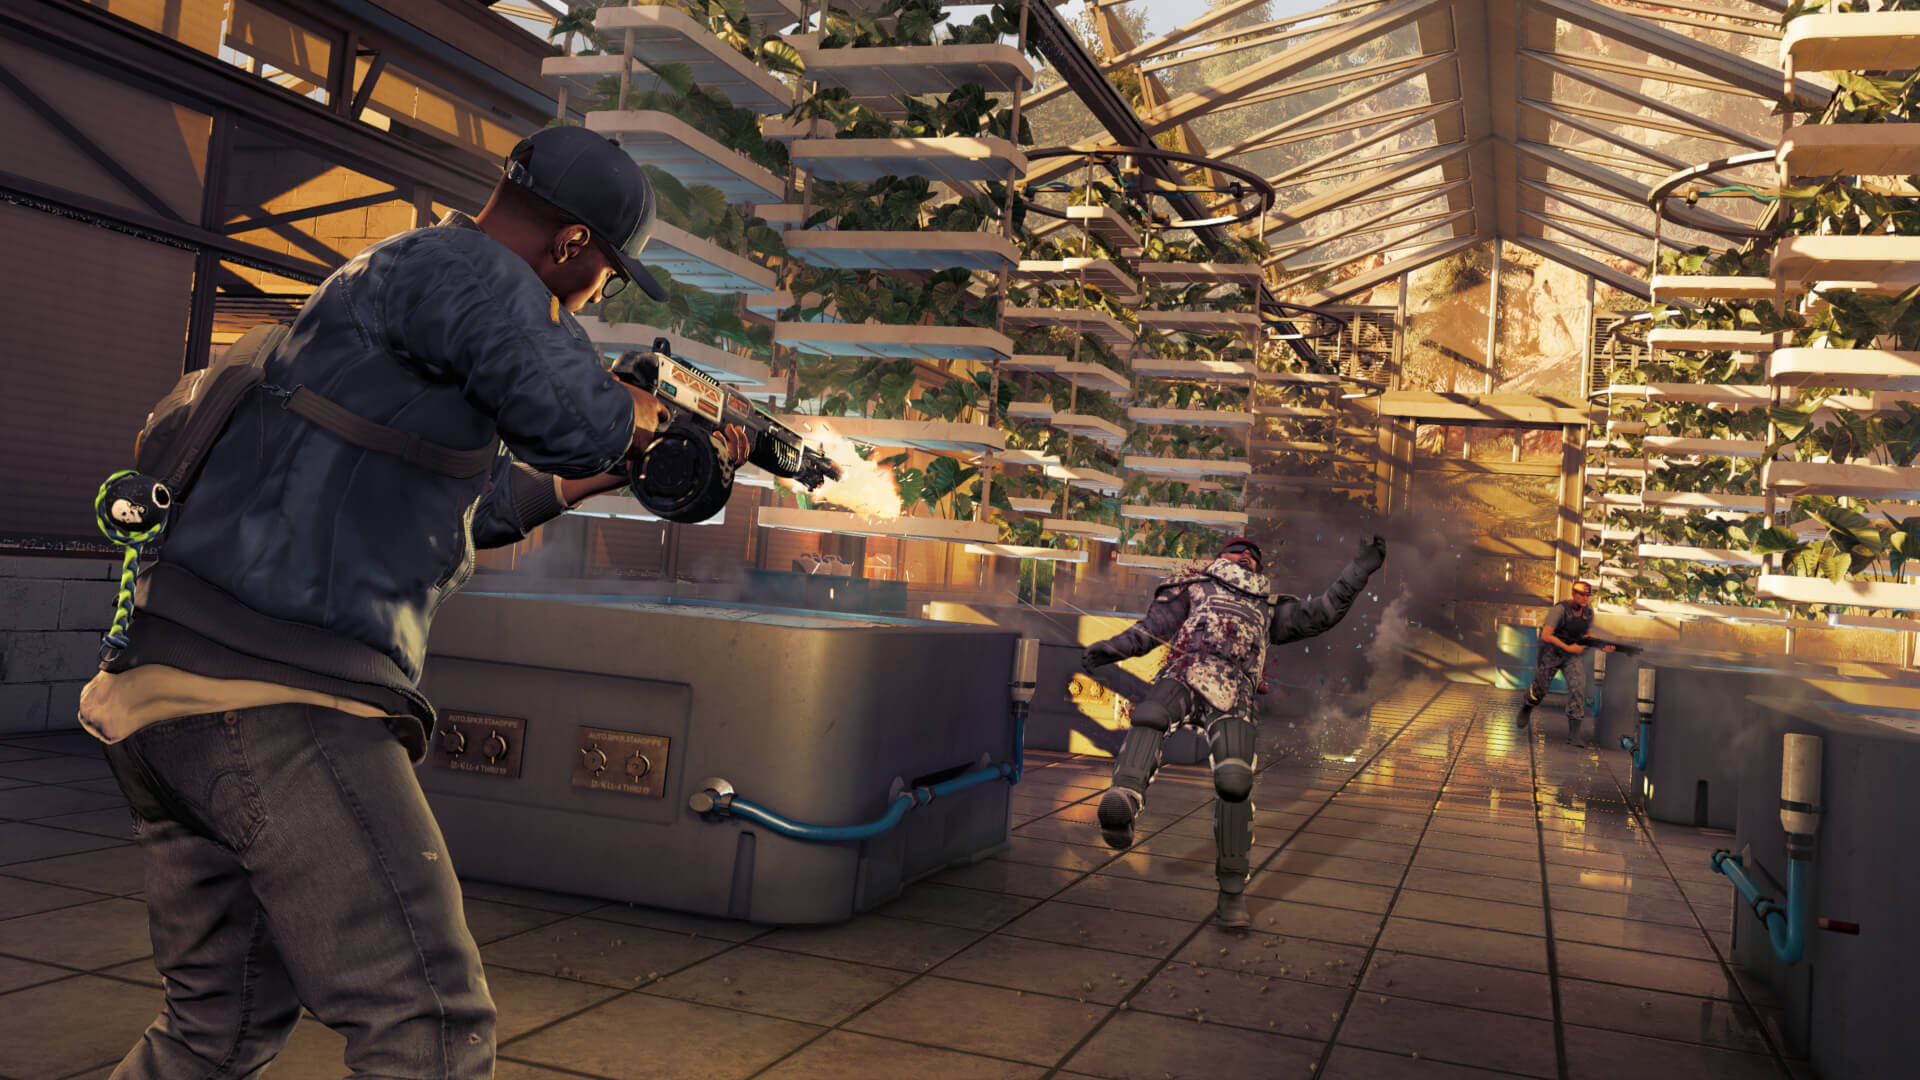 Marcus shooting at enemies in a greenhouse in Watch Dogs 2